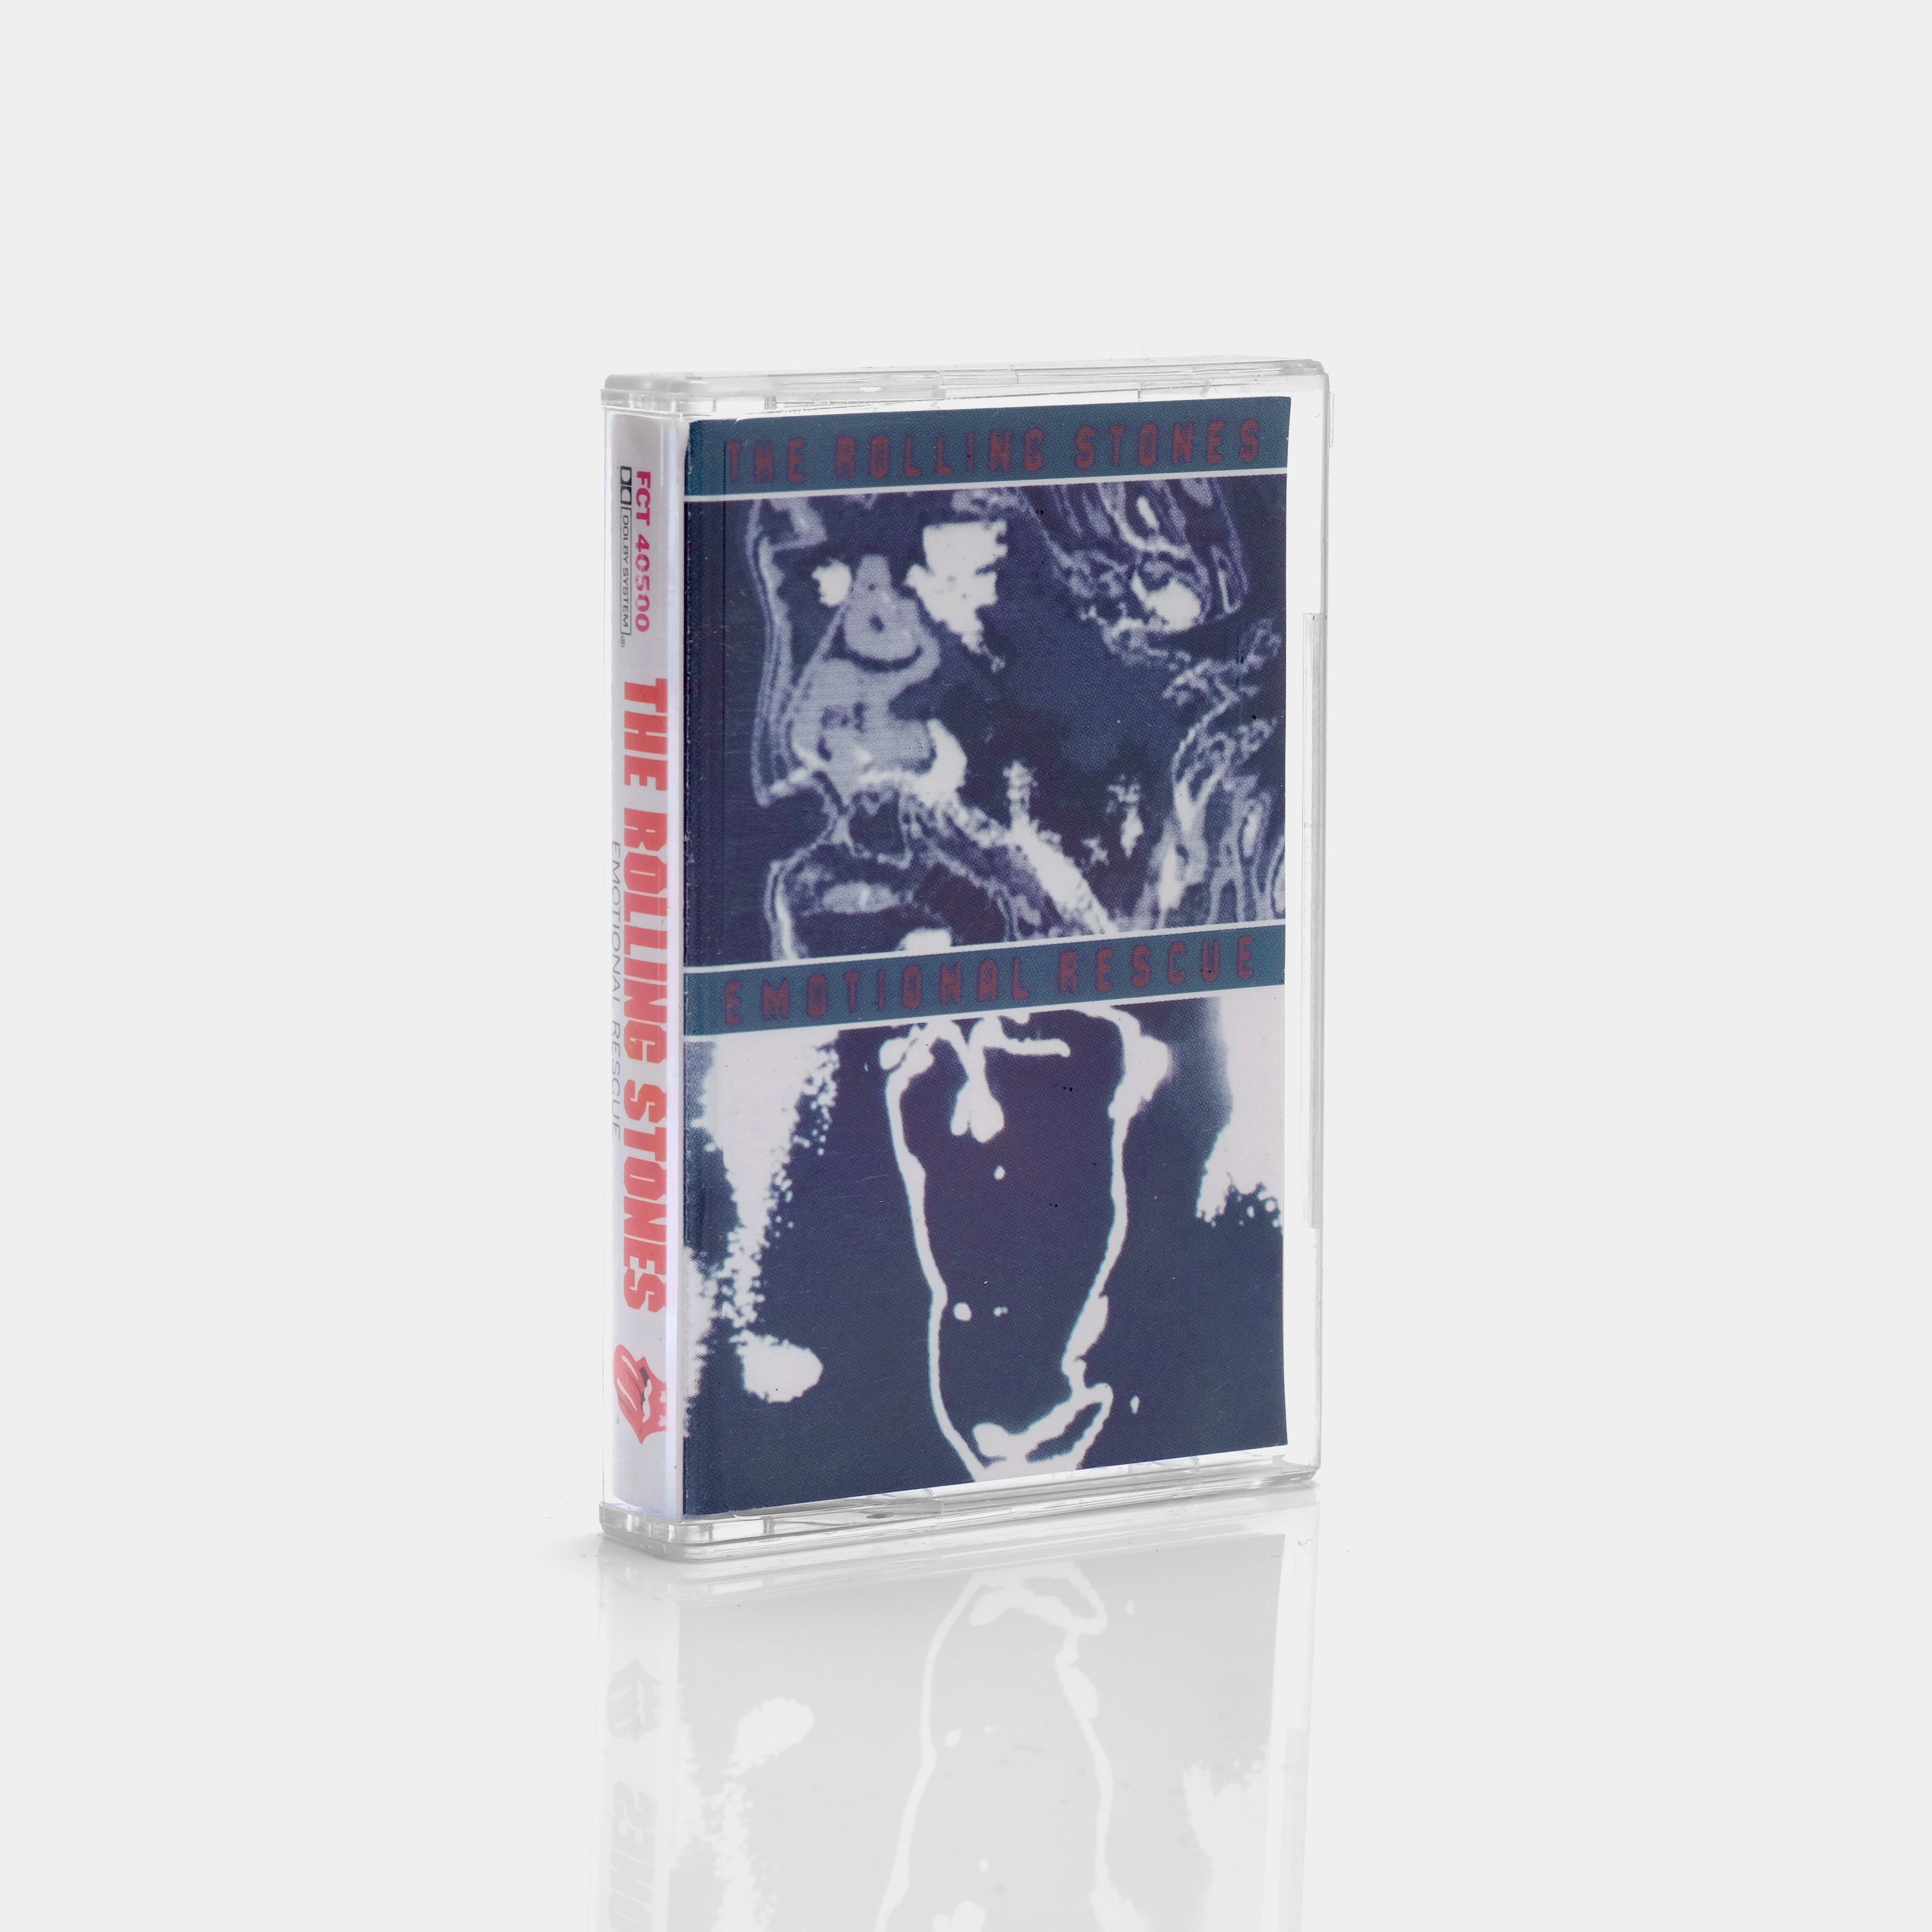 The Rolling Stones - Emotional Rescue Cassette Tape